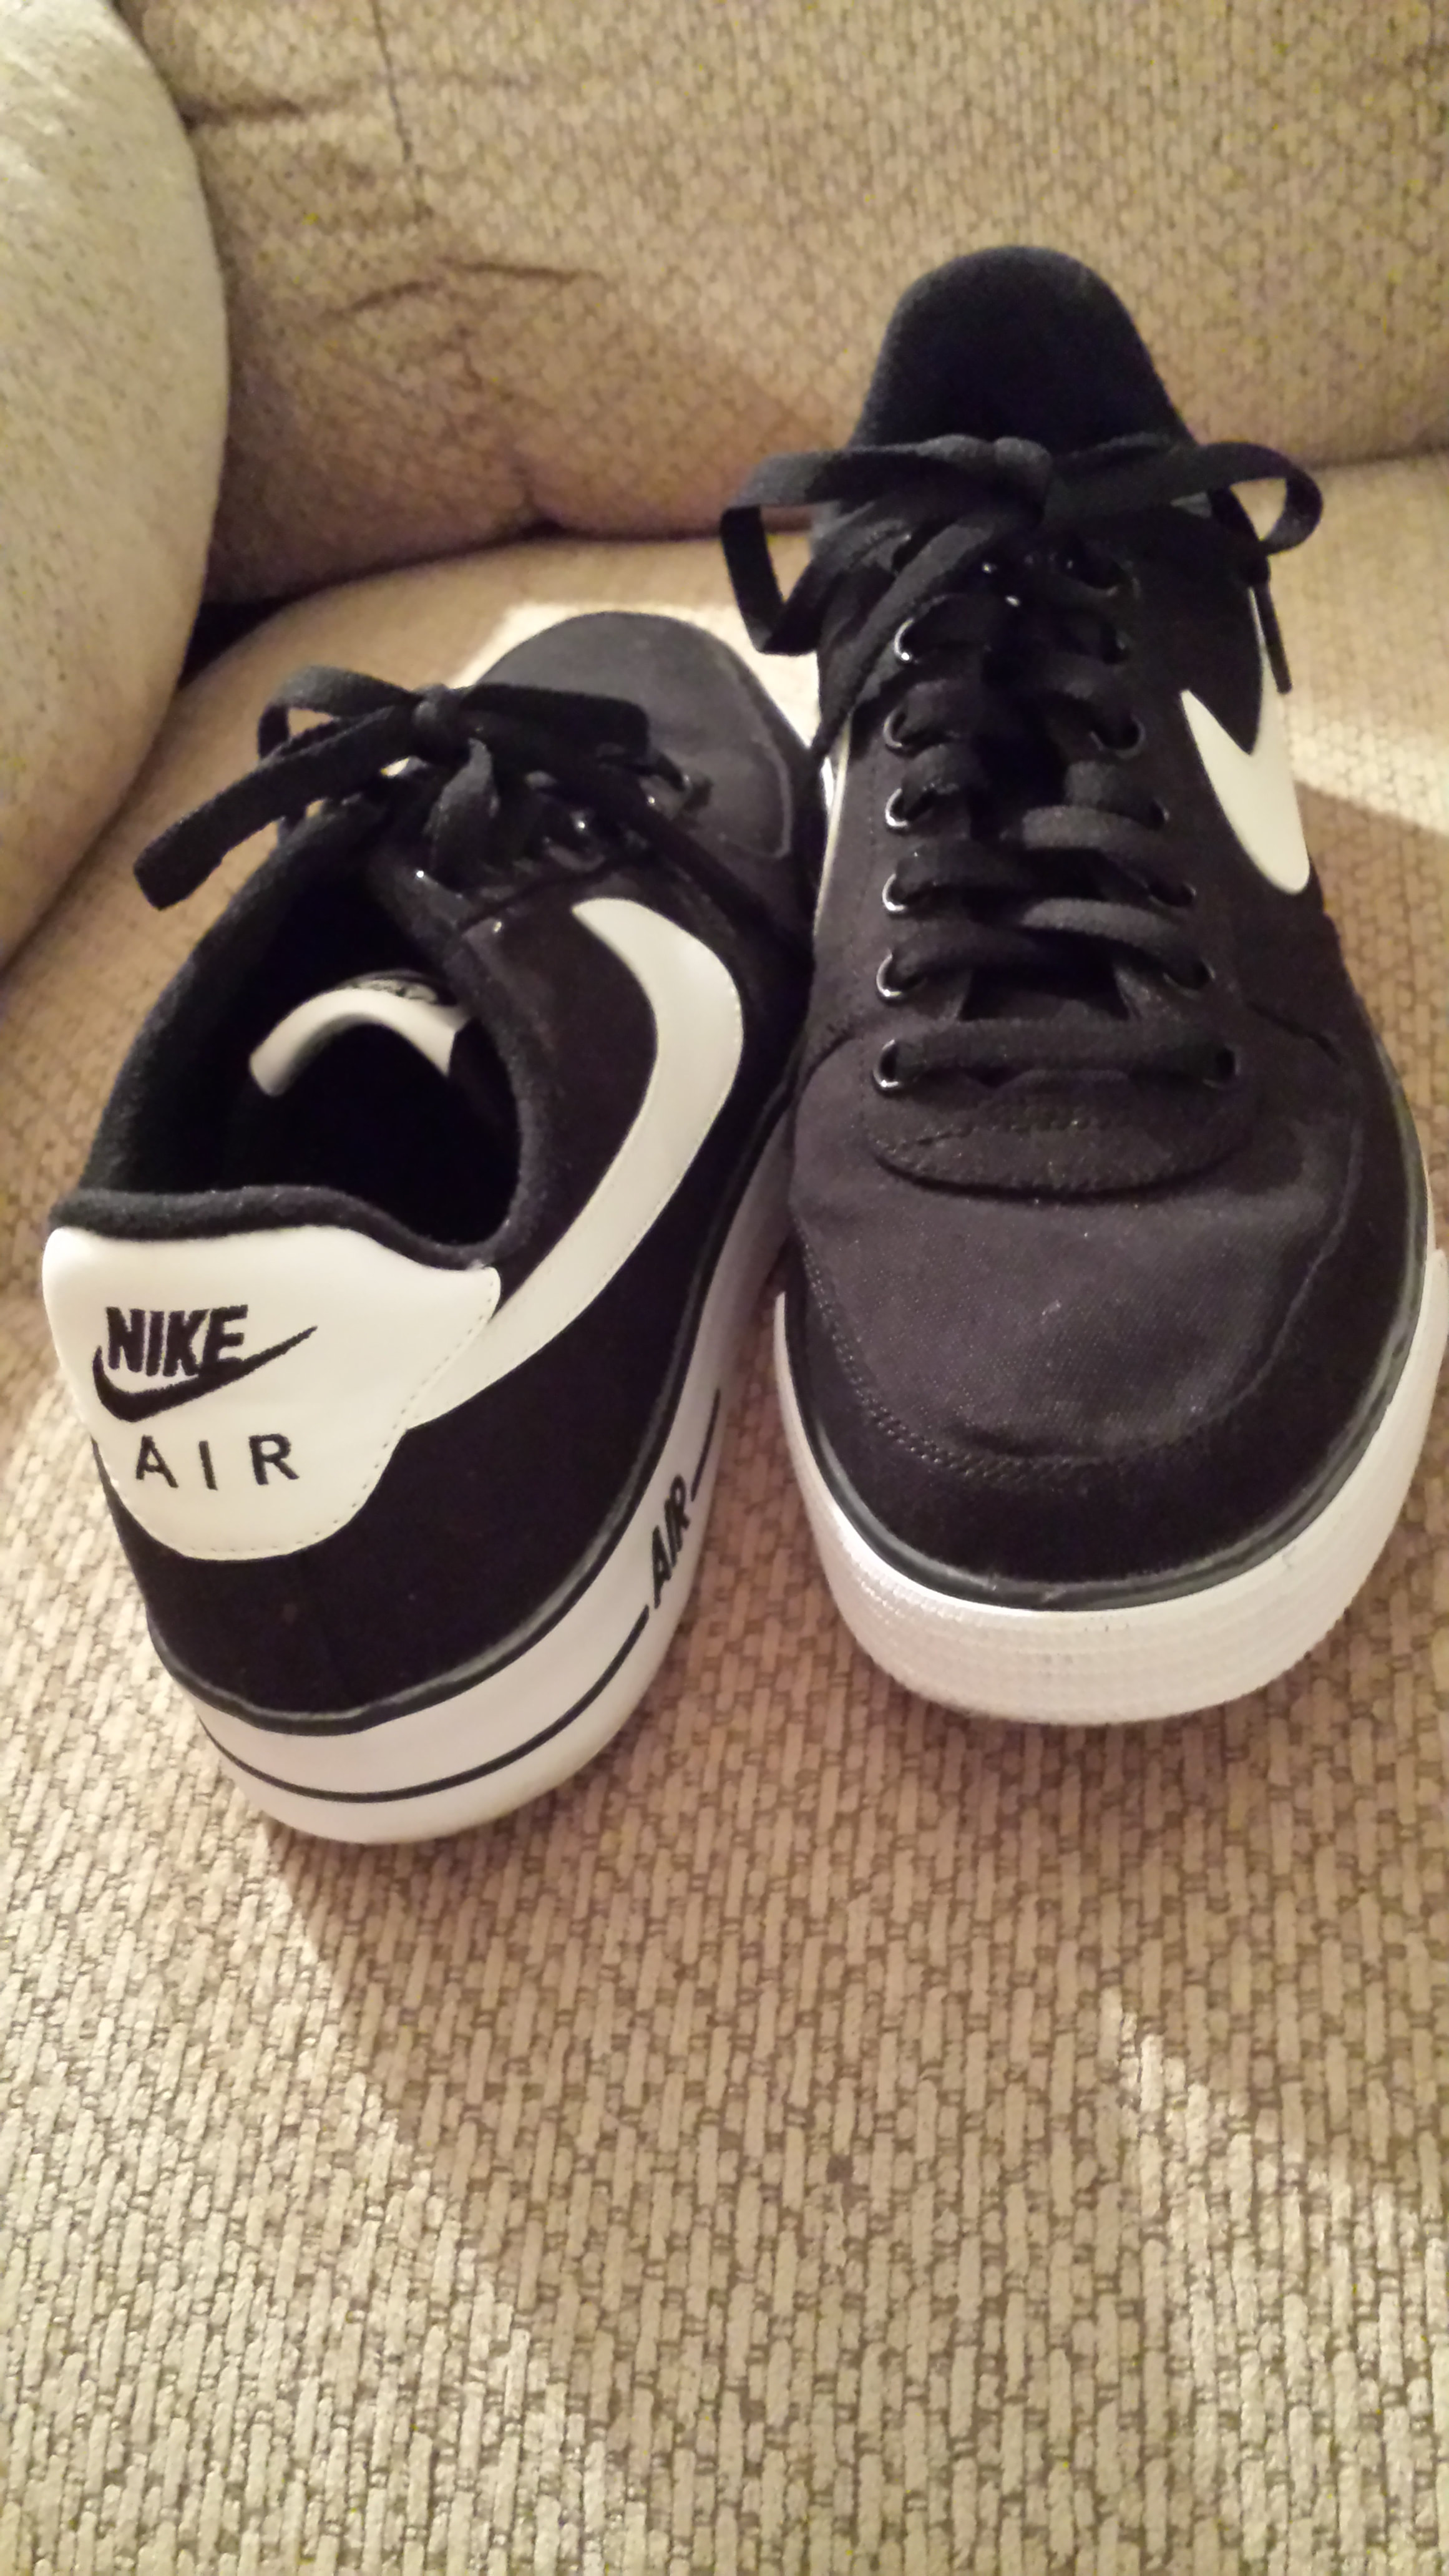 Nike Air Black and White Air Force 1 Pre Owned Tennis Shoes